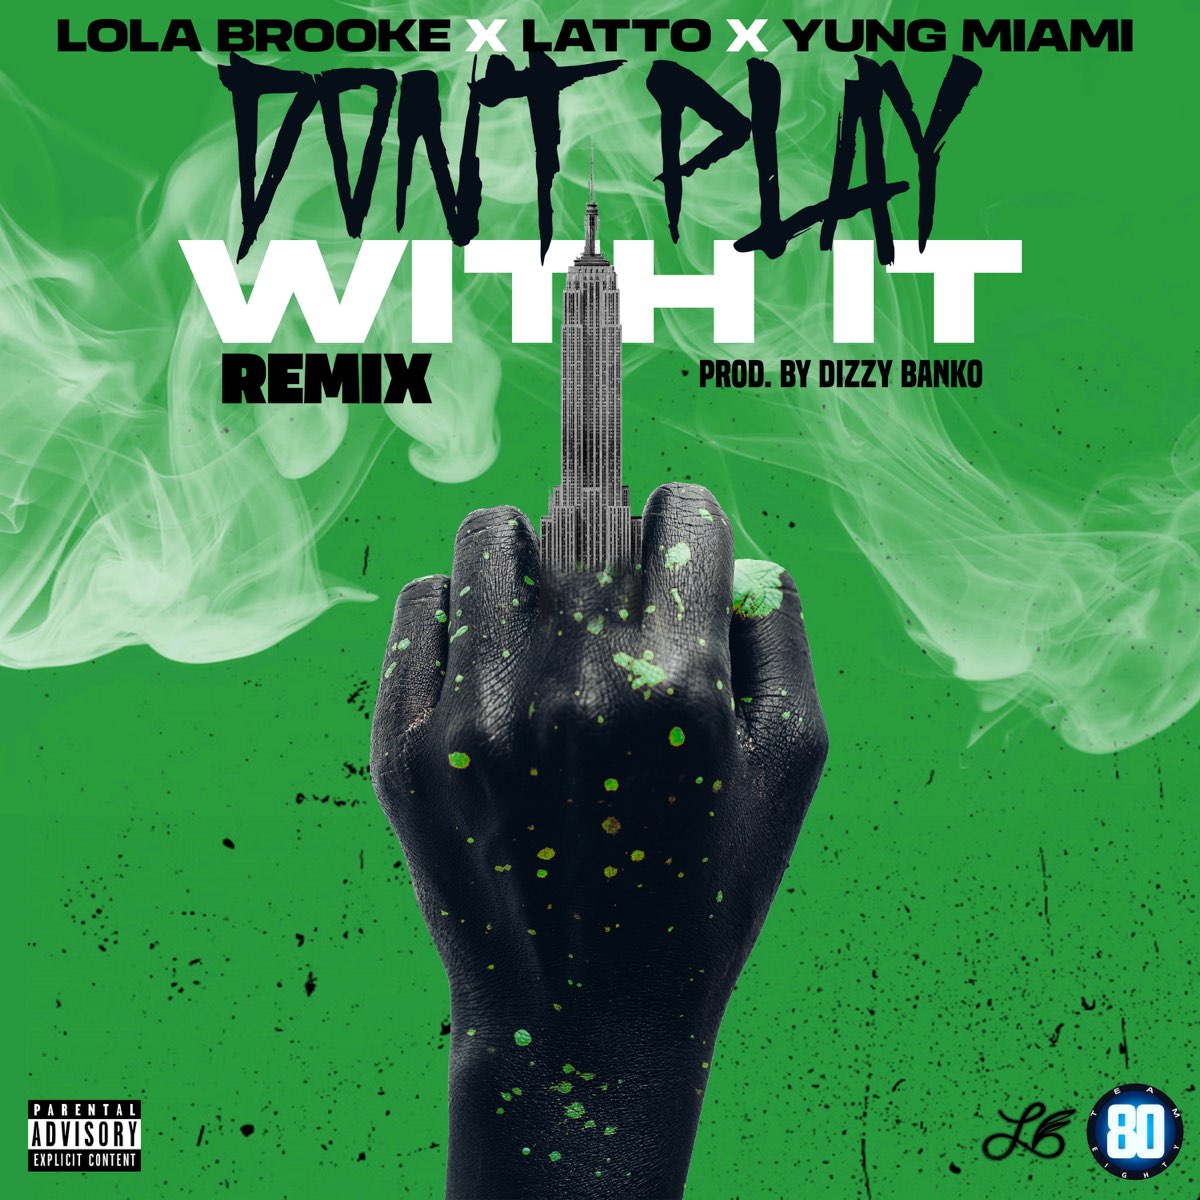 ‎dont Play With It Remix Feat Latto And Yung Miami Single Album By Lola Brooke Apple Music